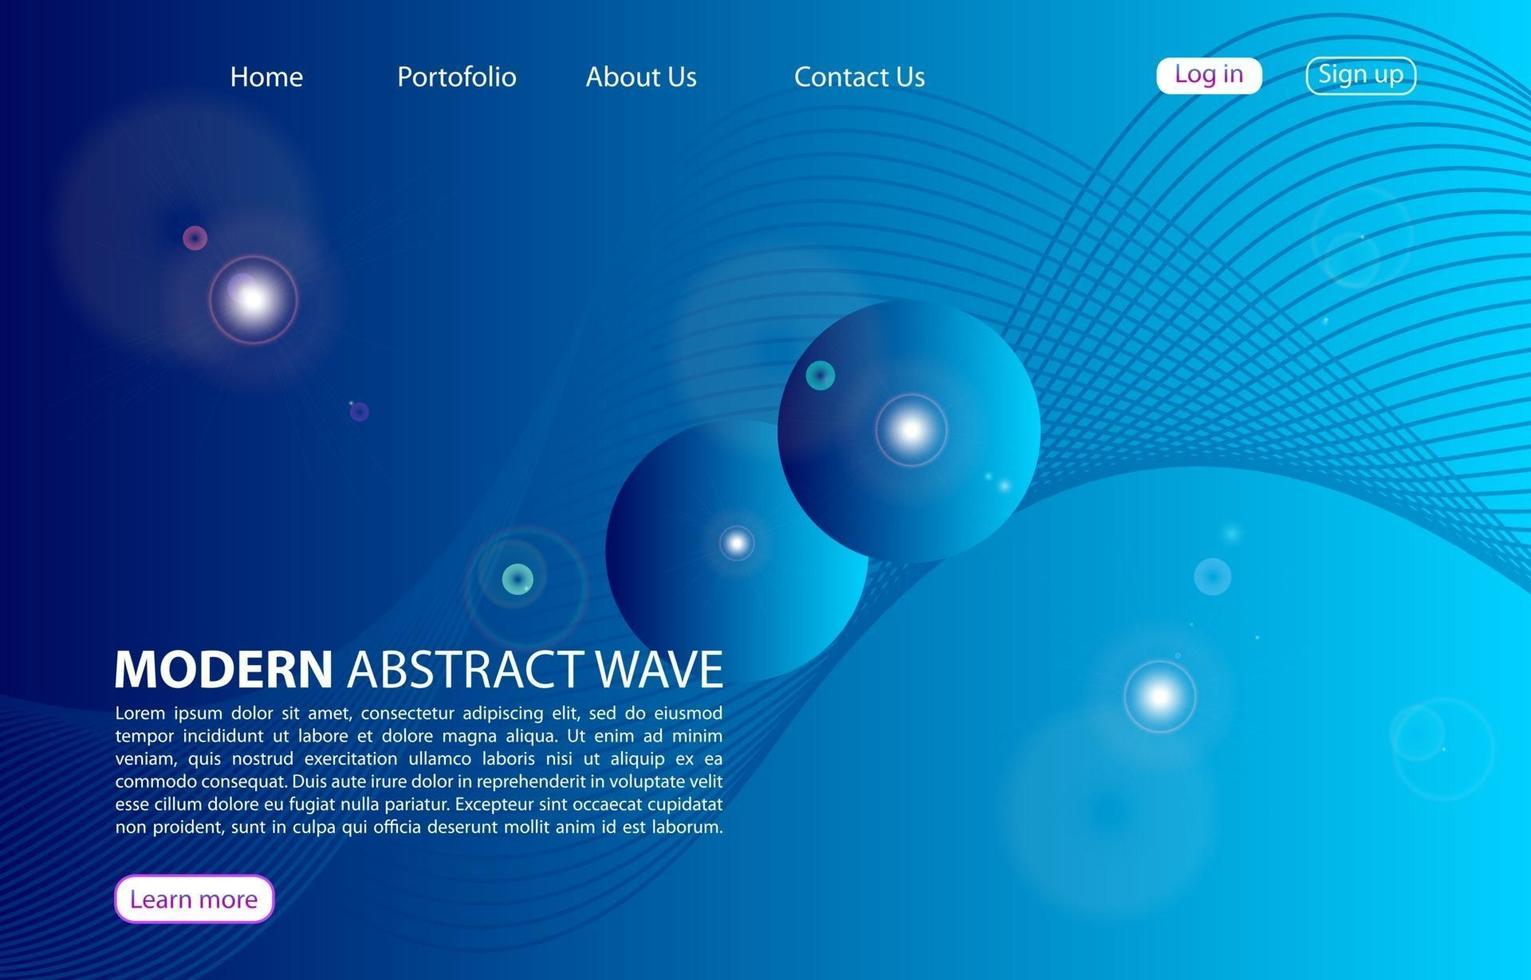 Landing Page. Abstract background website. Template for websites, or apps. Modern design. Abstract vector style design